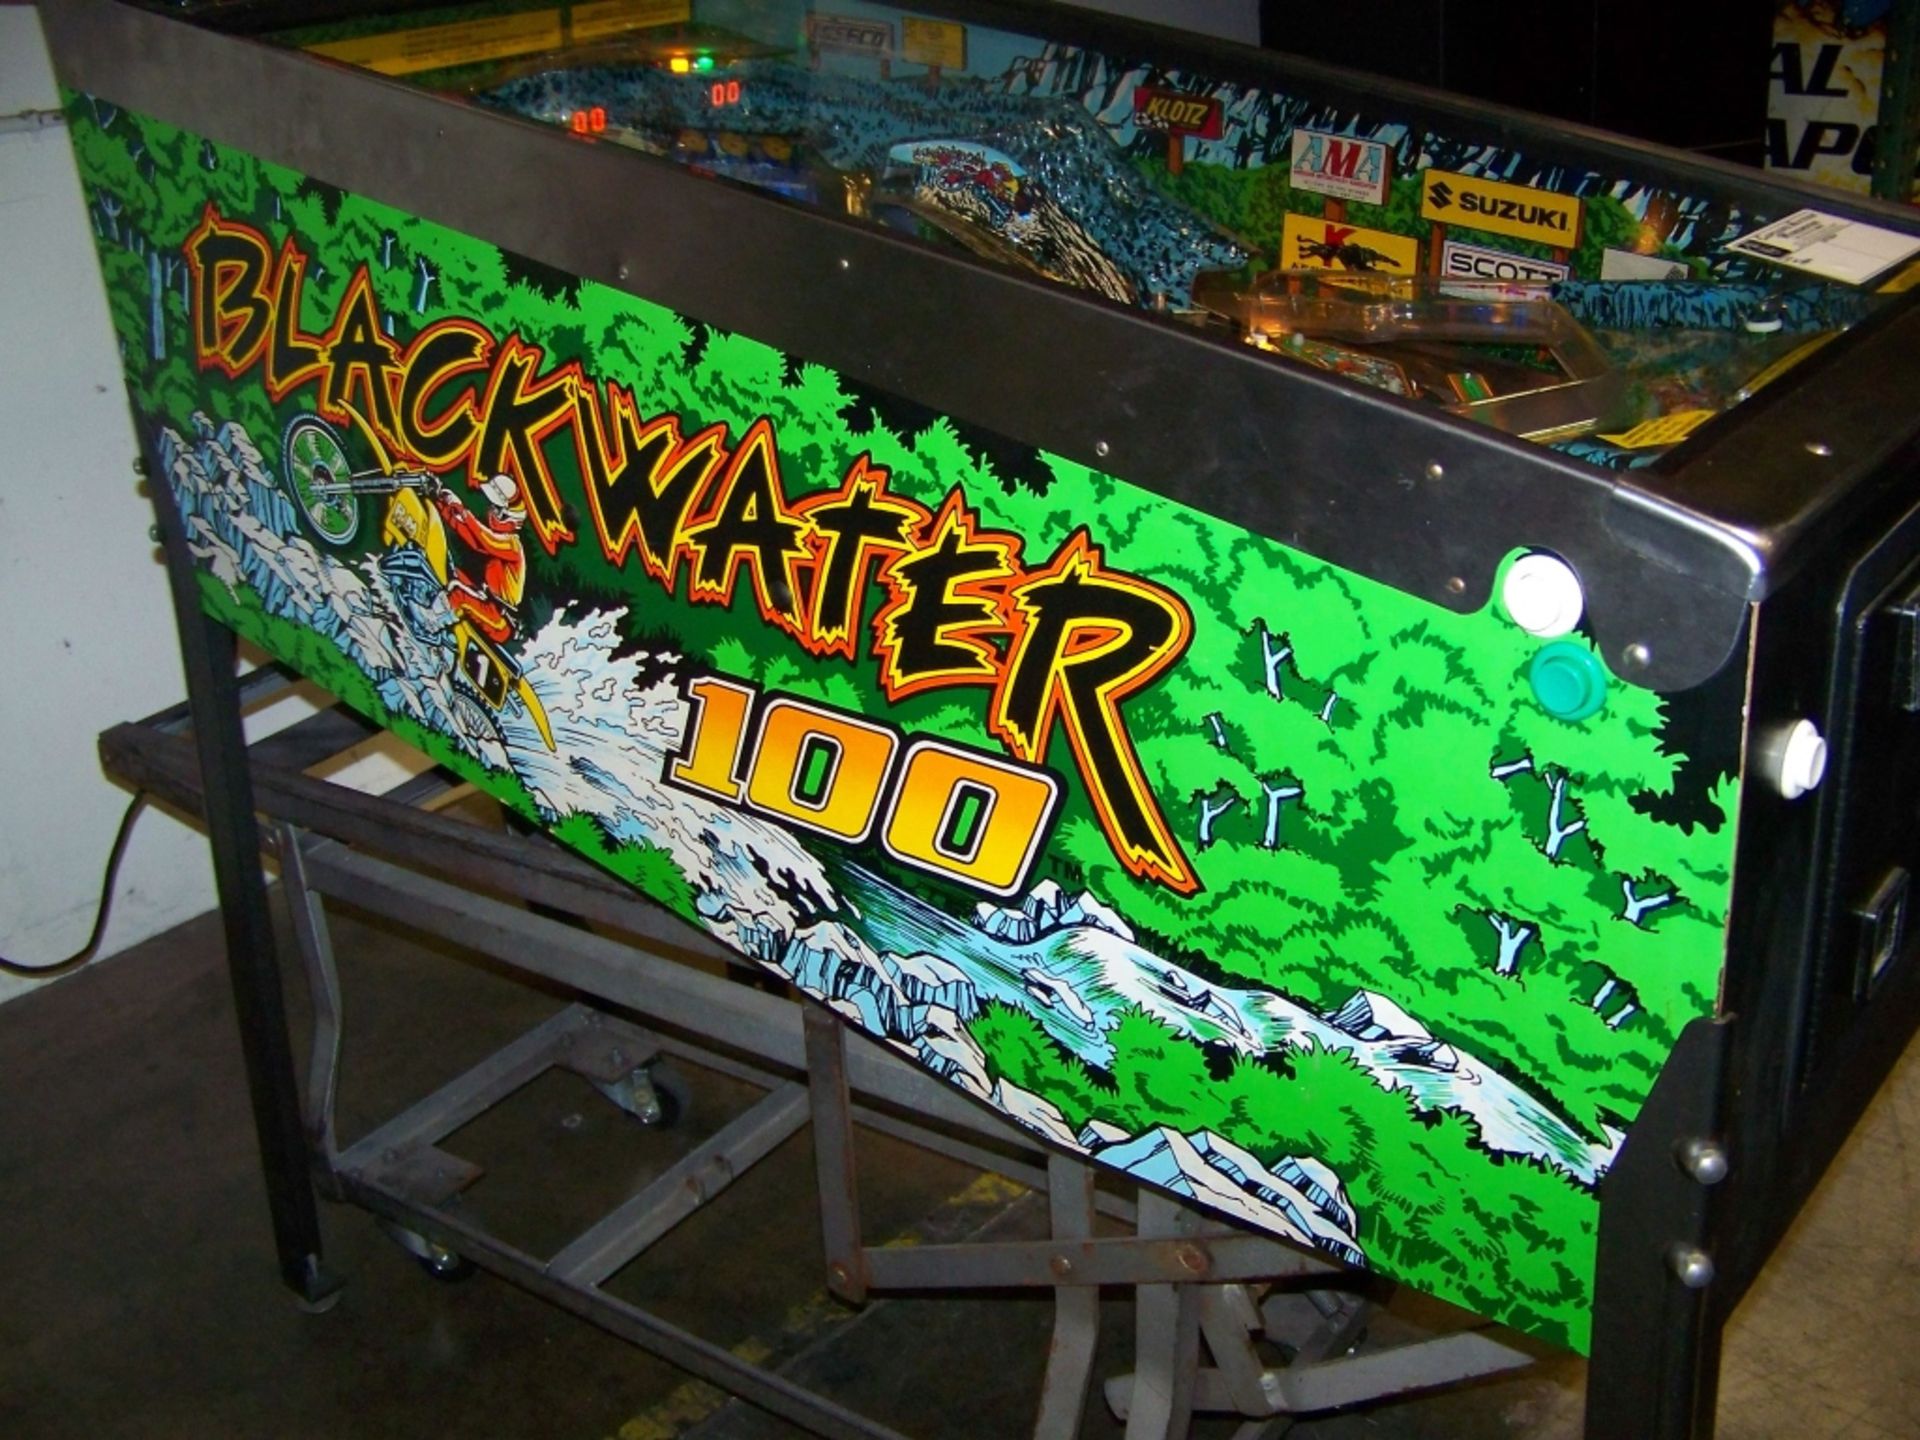 BLACKWATER 100 PINBALL MACHINE BALLY 1988 Item is in used condition. Evidence of wear and commercial - Image 3 of 10